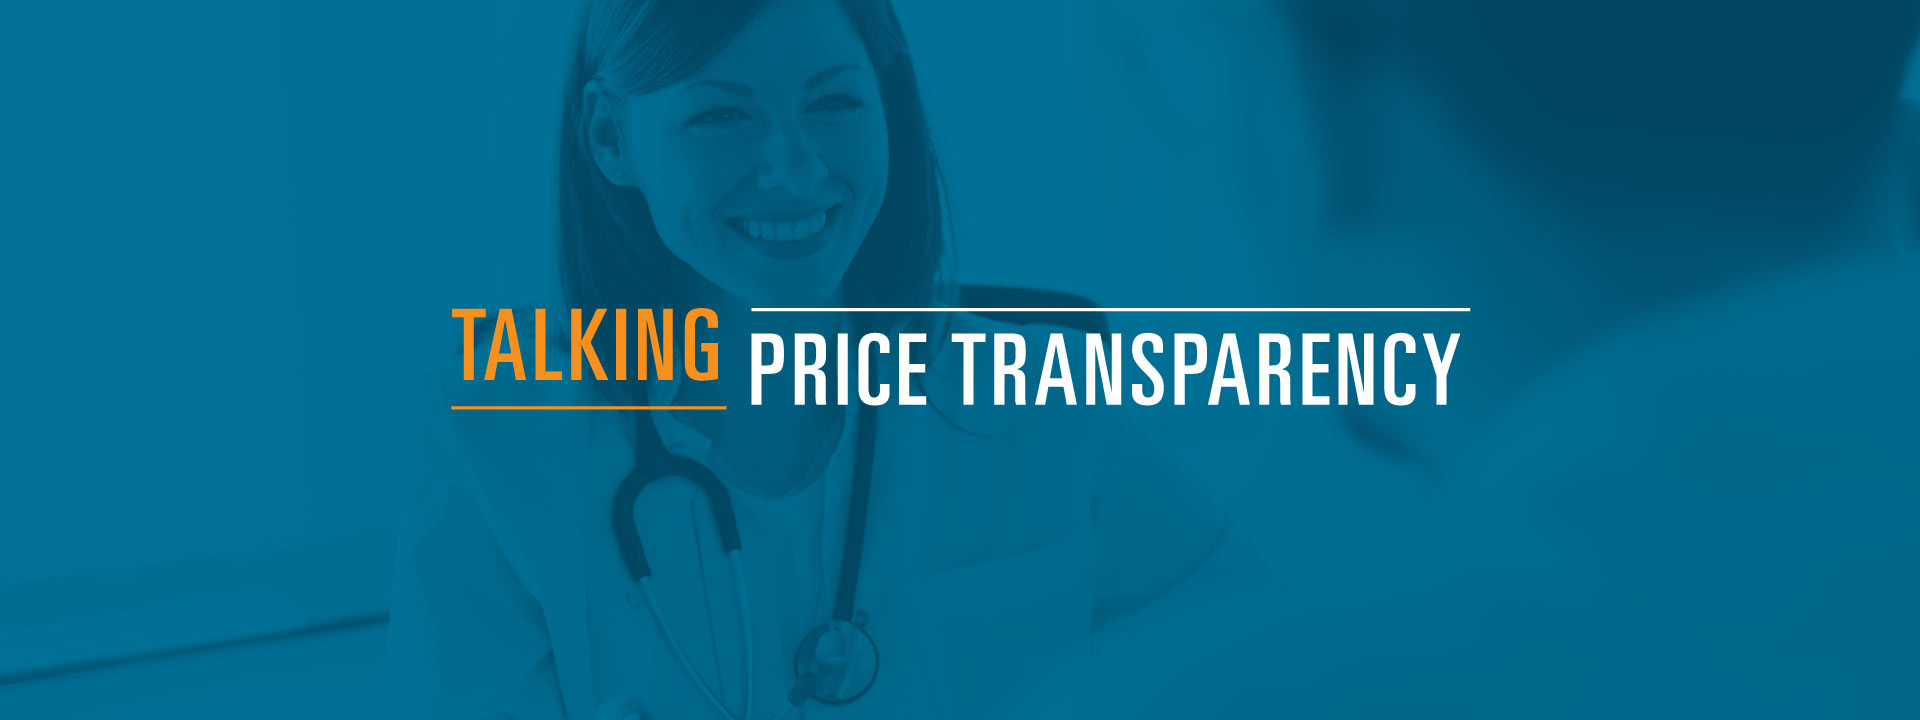 Price Transparency: It’s in 